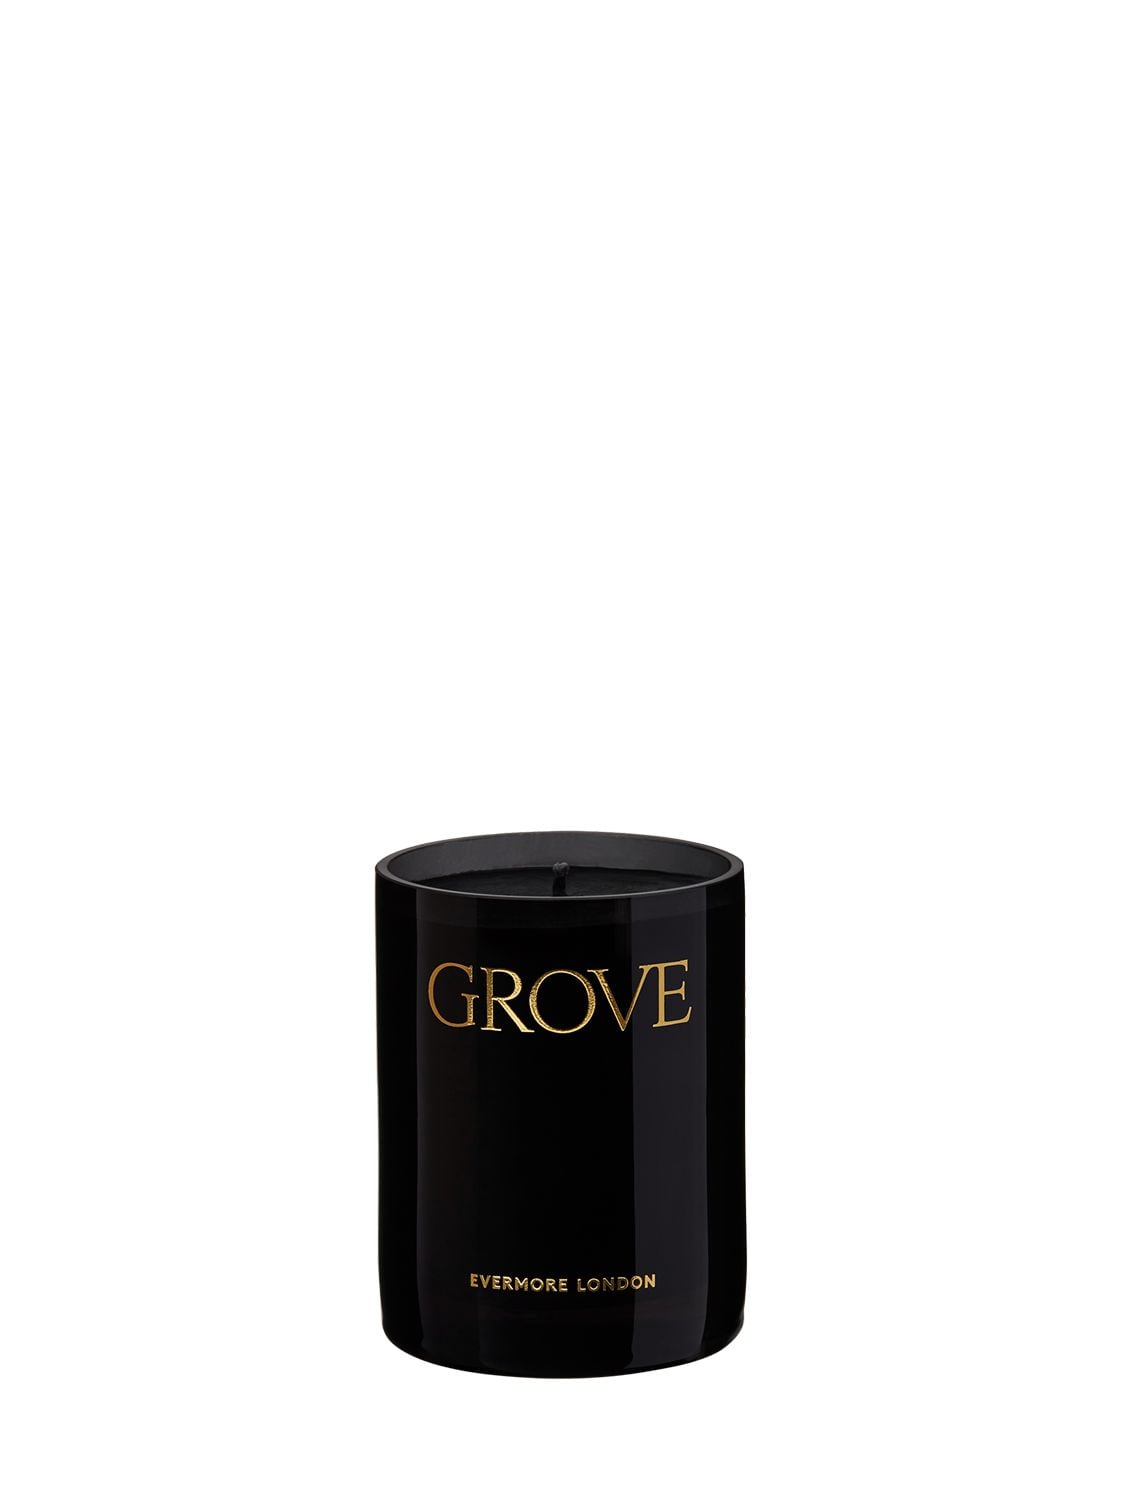 Evermore 300g Grove Scented Candle In Black